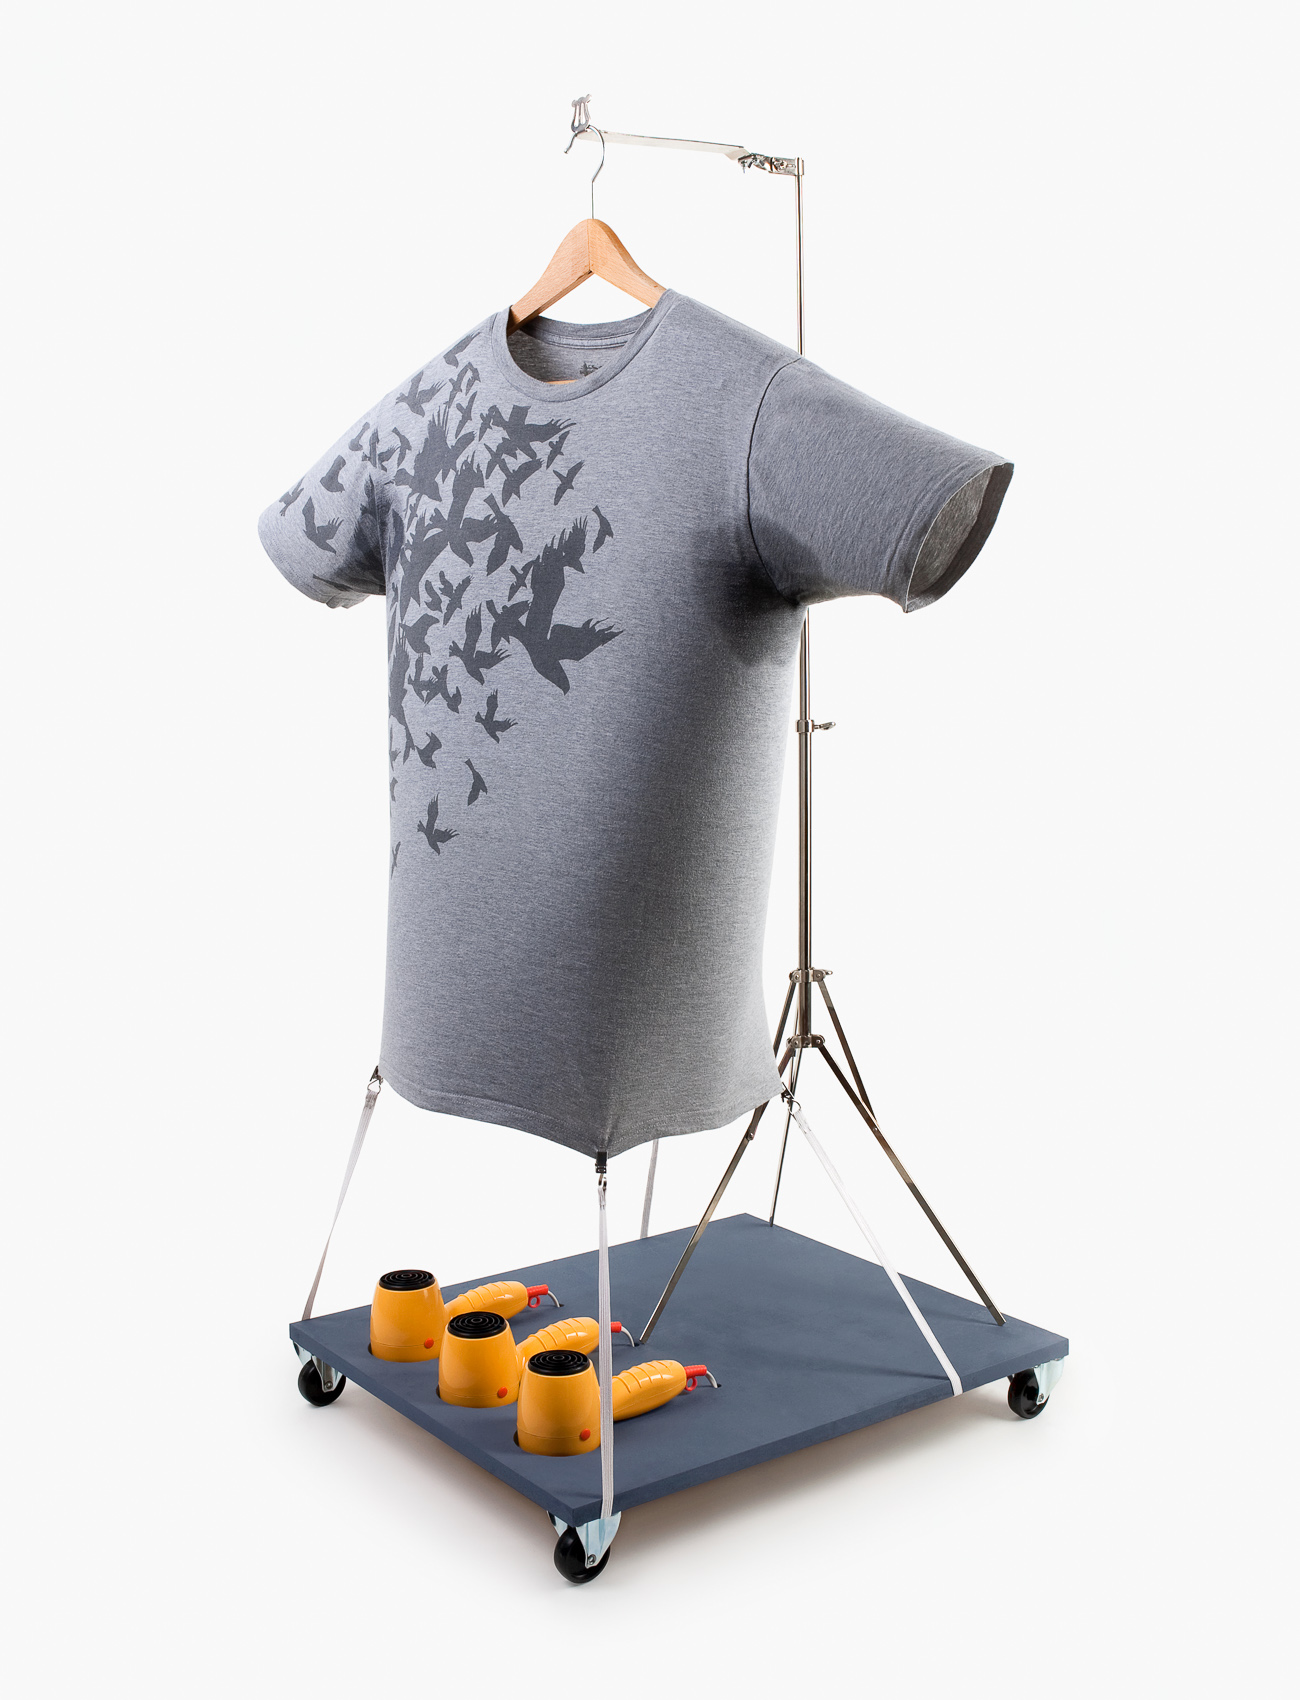 Portable sweaty armpit T-shirt dryer / Prototypes | Los Angeles | Editorial and Commercial Photographer Patrick Strattner